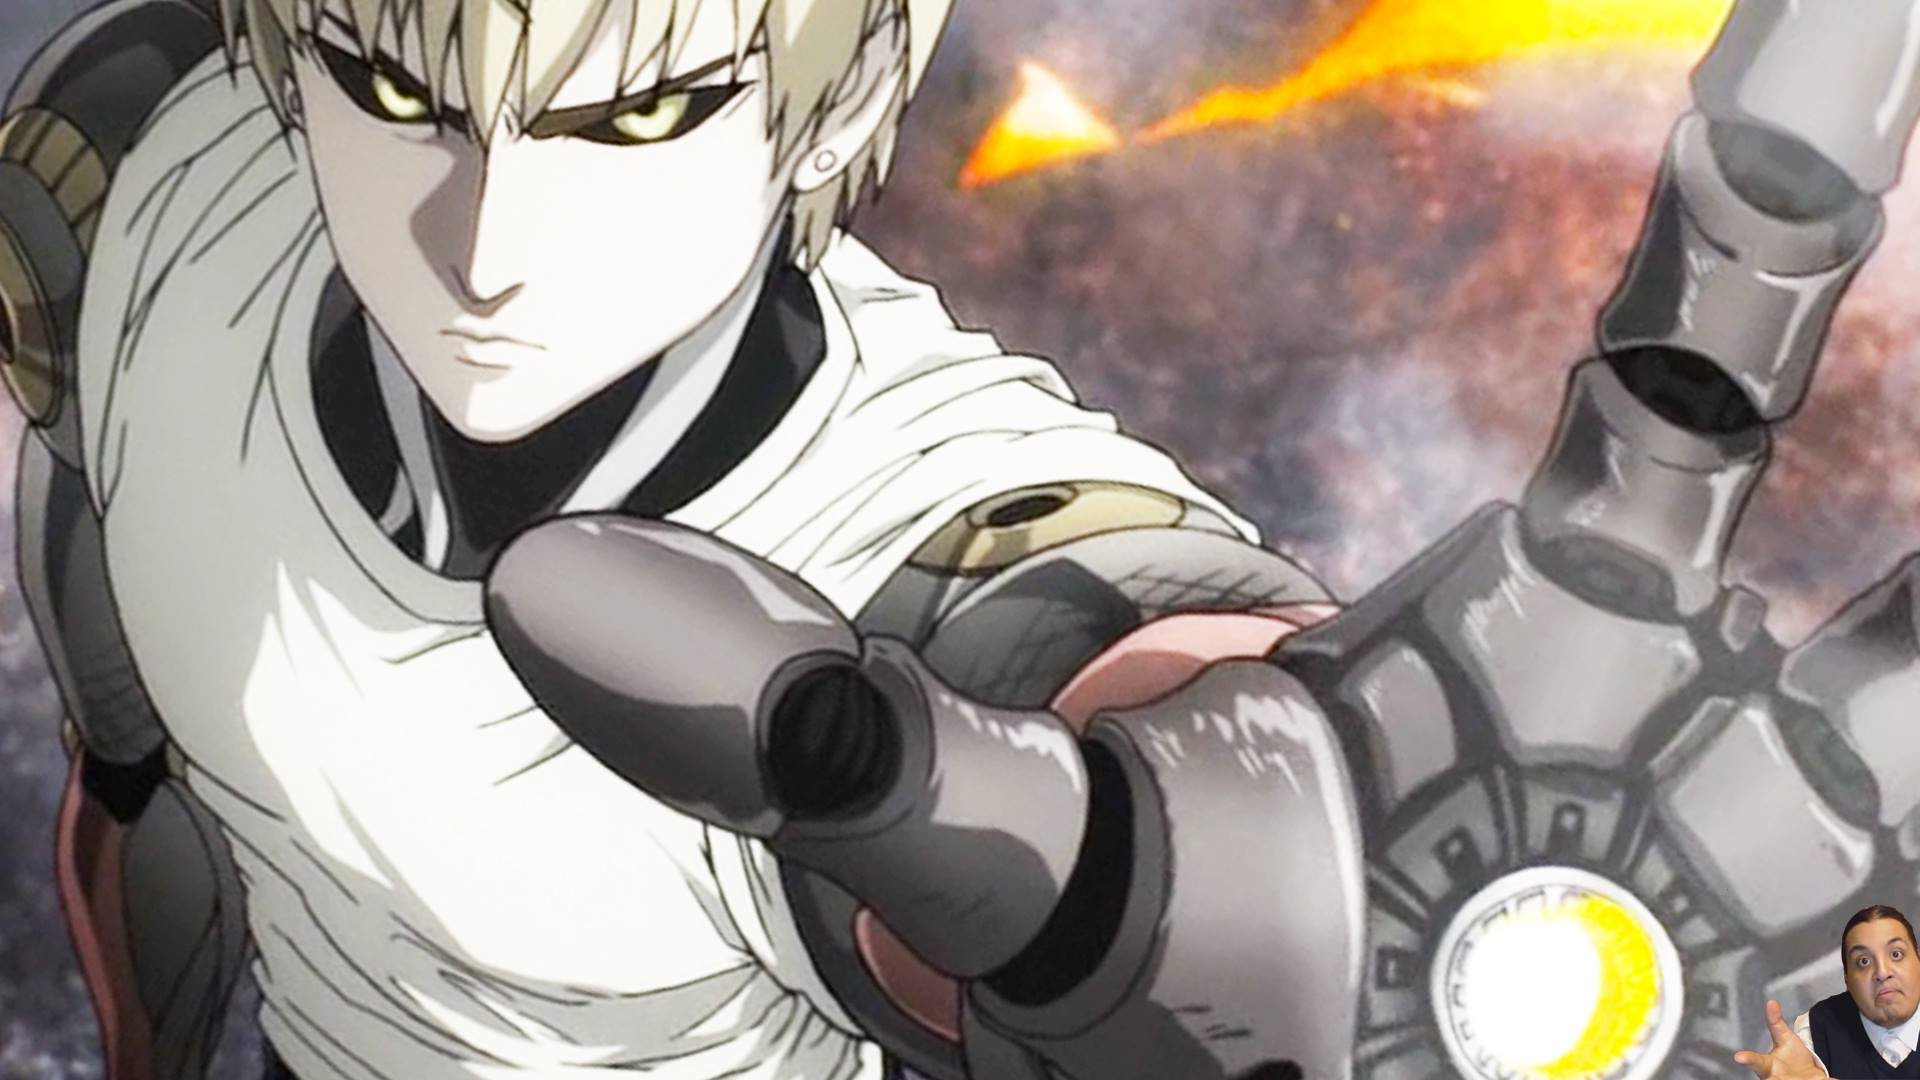 Free Download One Punch Man Genos 11 Hd Wallpaper Download 19x1080 For Your Desktop Mobile Tablet Explore 48 One Punch Man Wallpaper 4k One Punch Man Desktop Wallpaper One